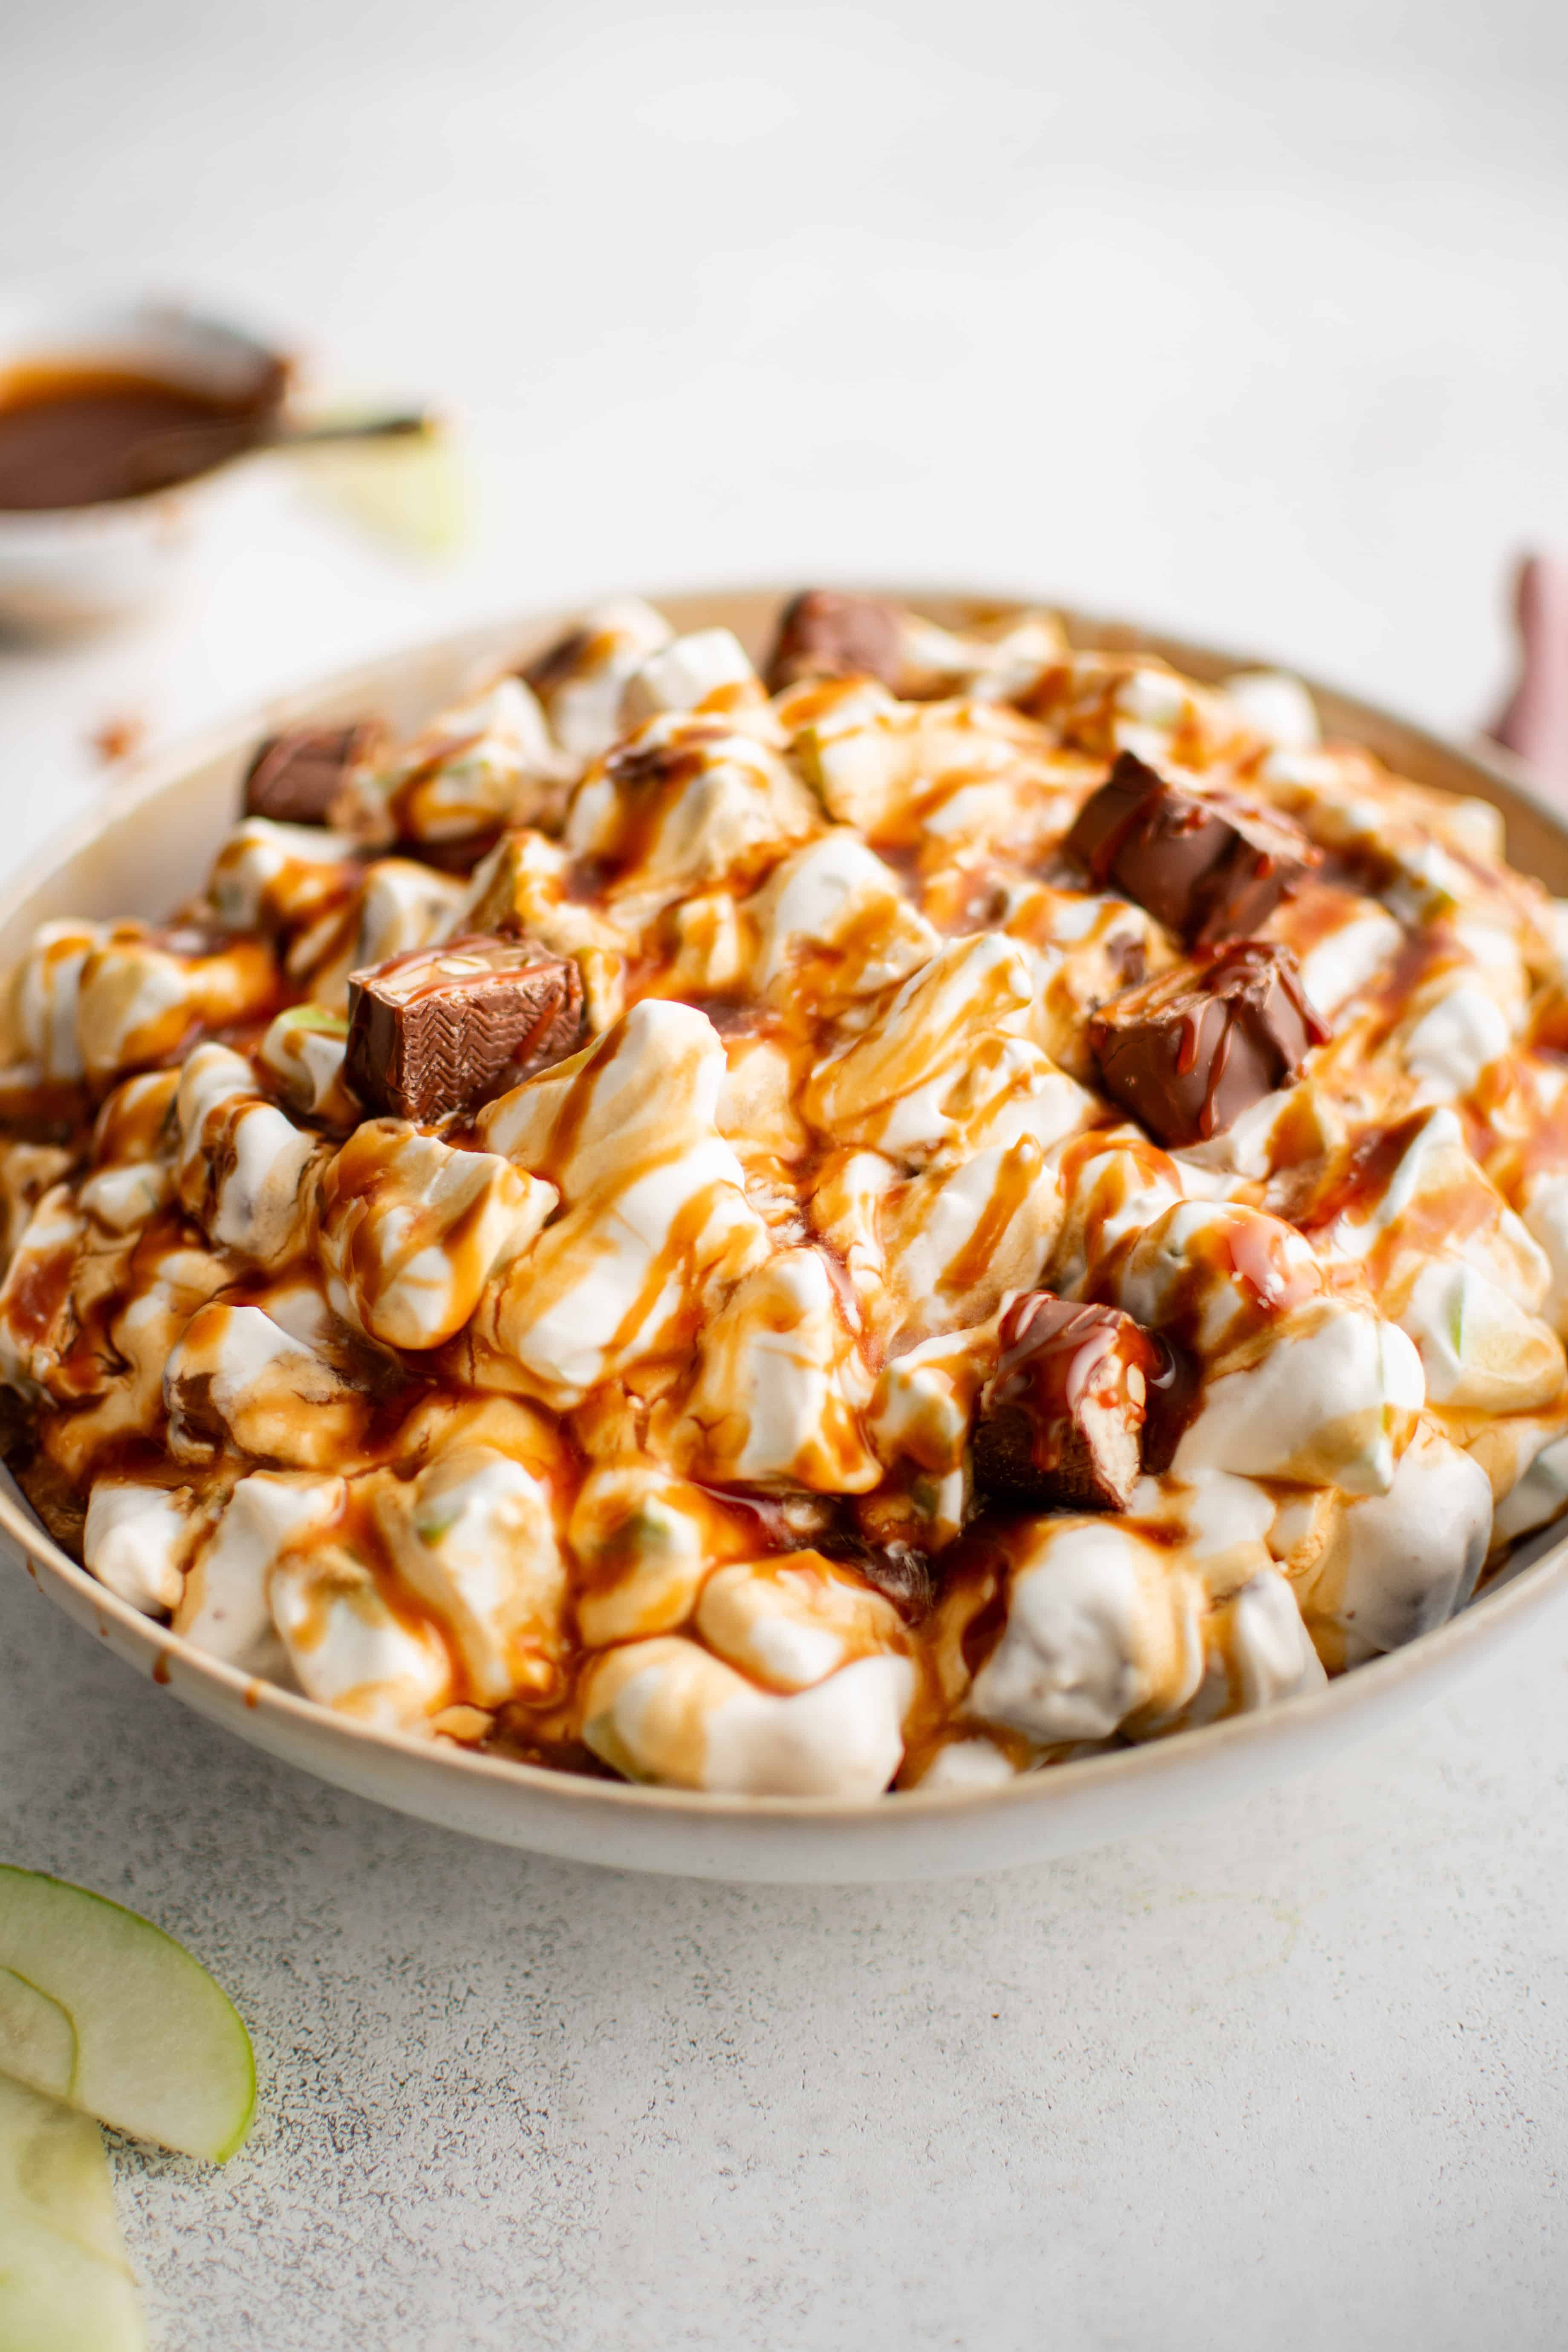 Snickers salad in a large white serving bowl drizzled with caramel sauce.